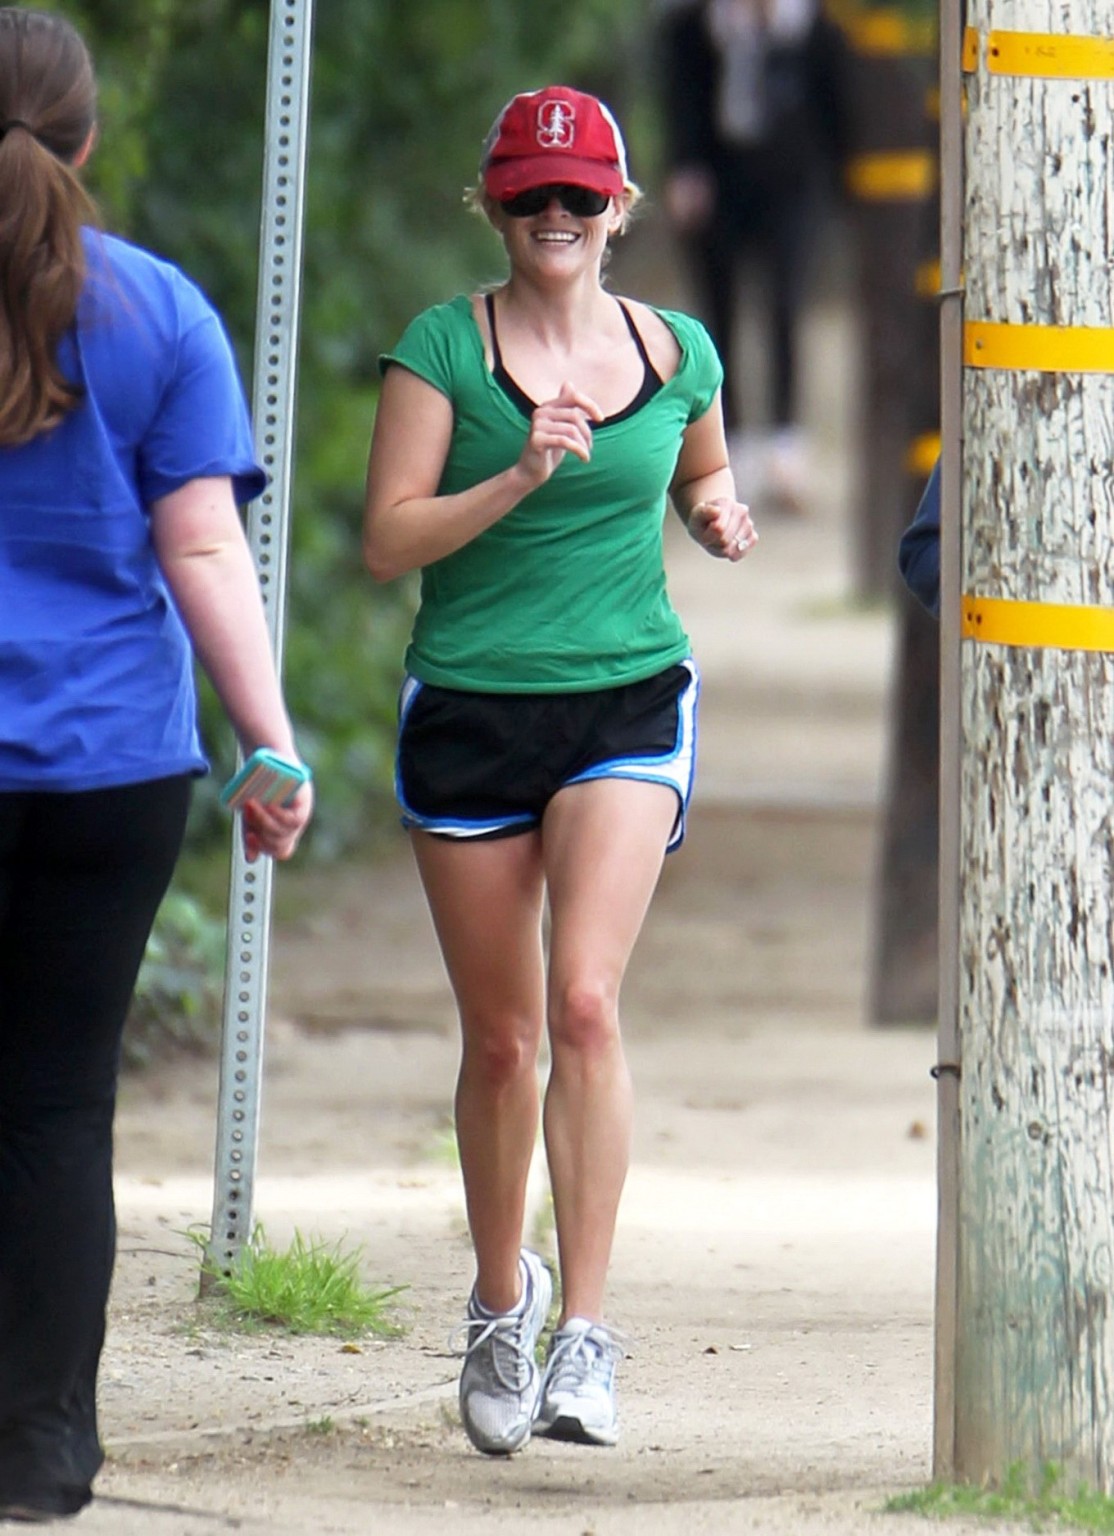 Reese Witherspoon langbeinig in Shorts beim Joggen in Brentwood
 #75312853